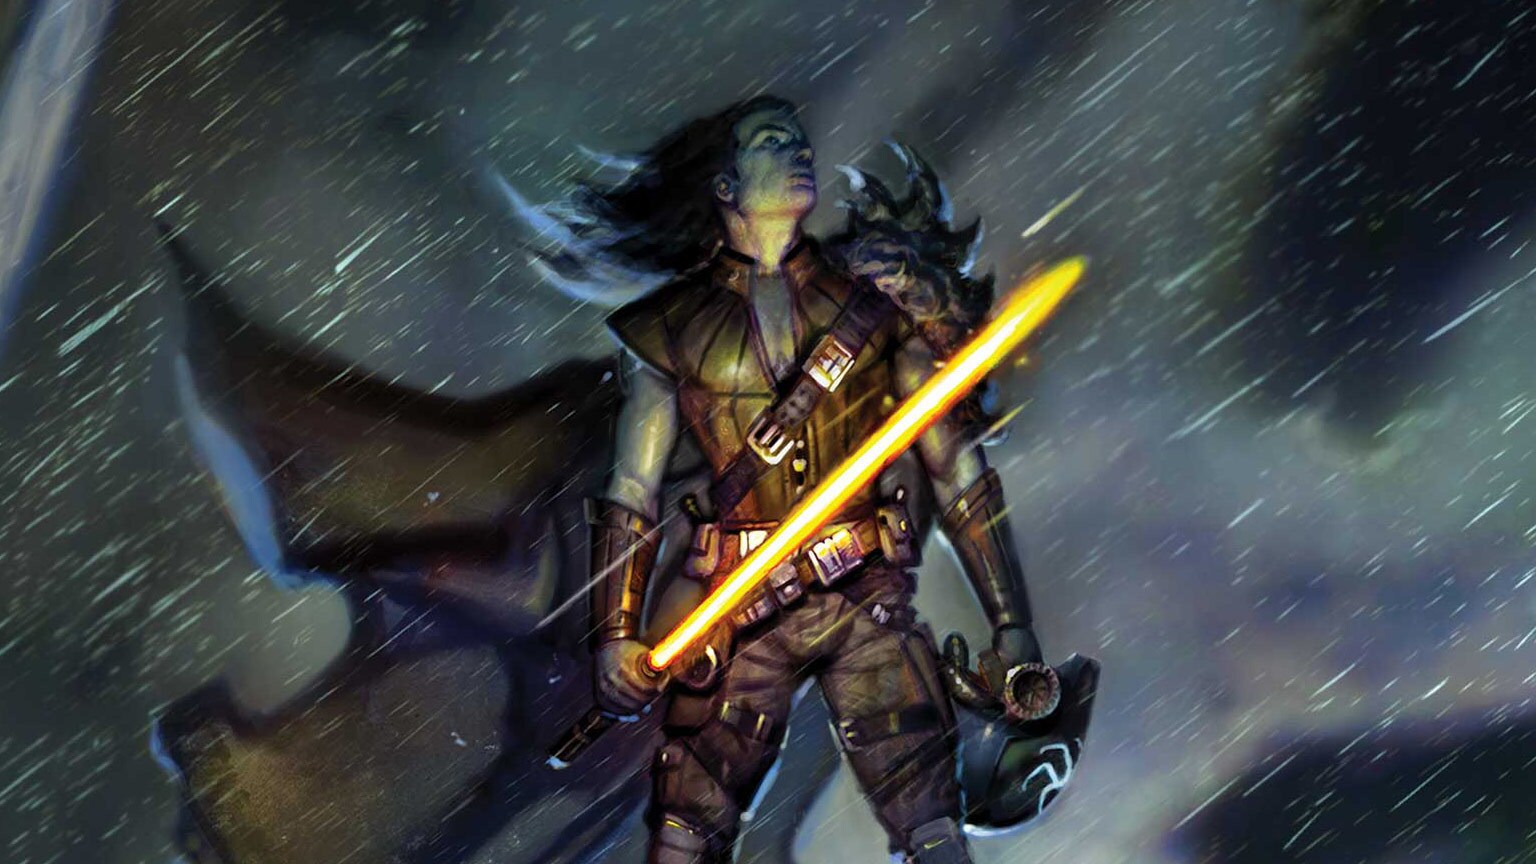 Marchion Ro's Origin Revealed and More in Marvel’s January 2022 Star Wars Comics - Exclusive